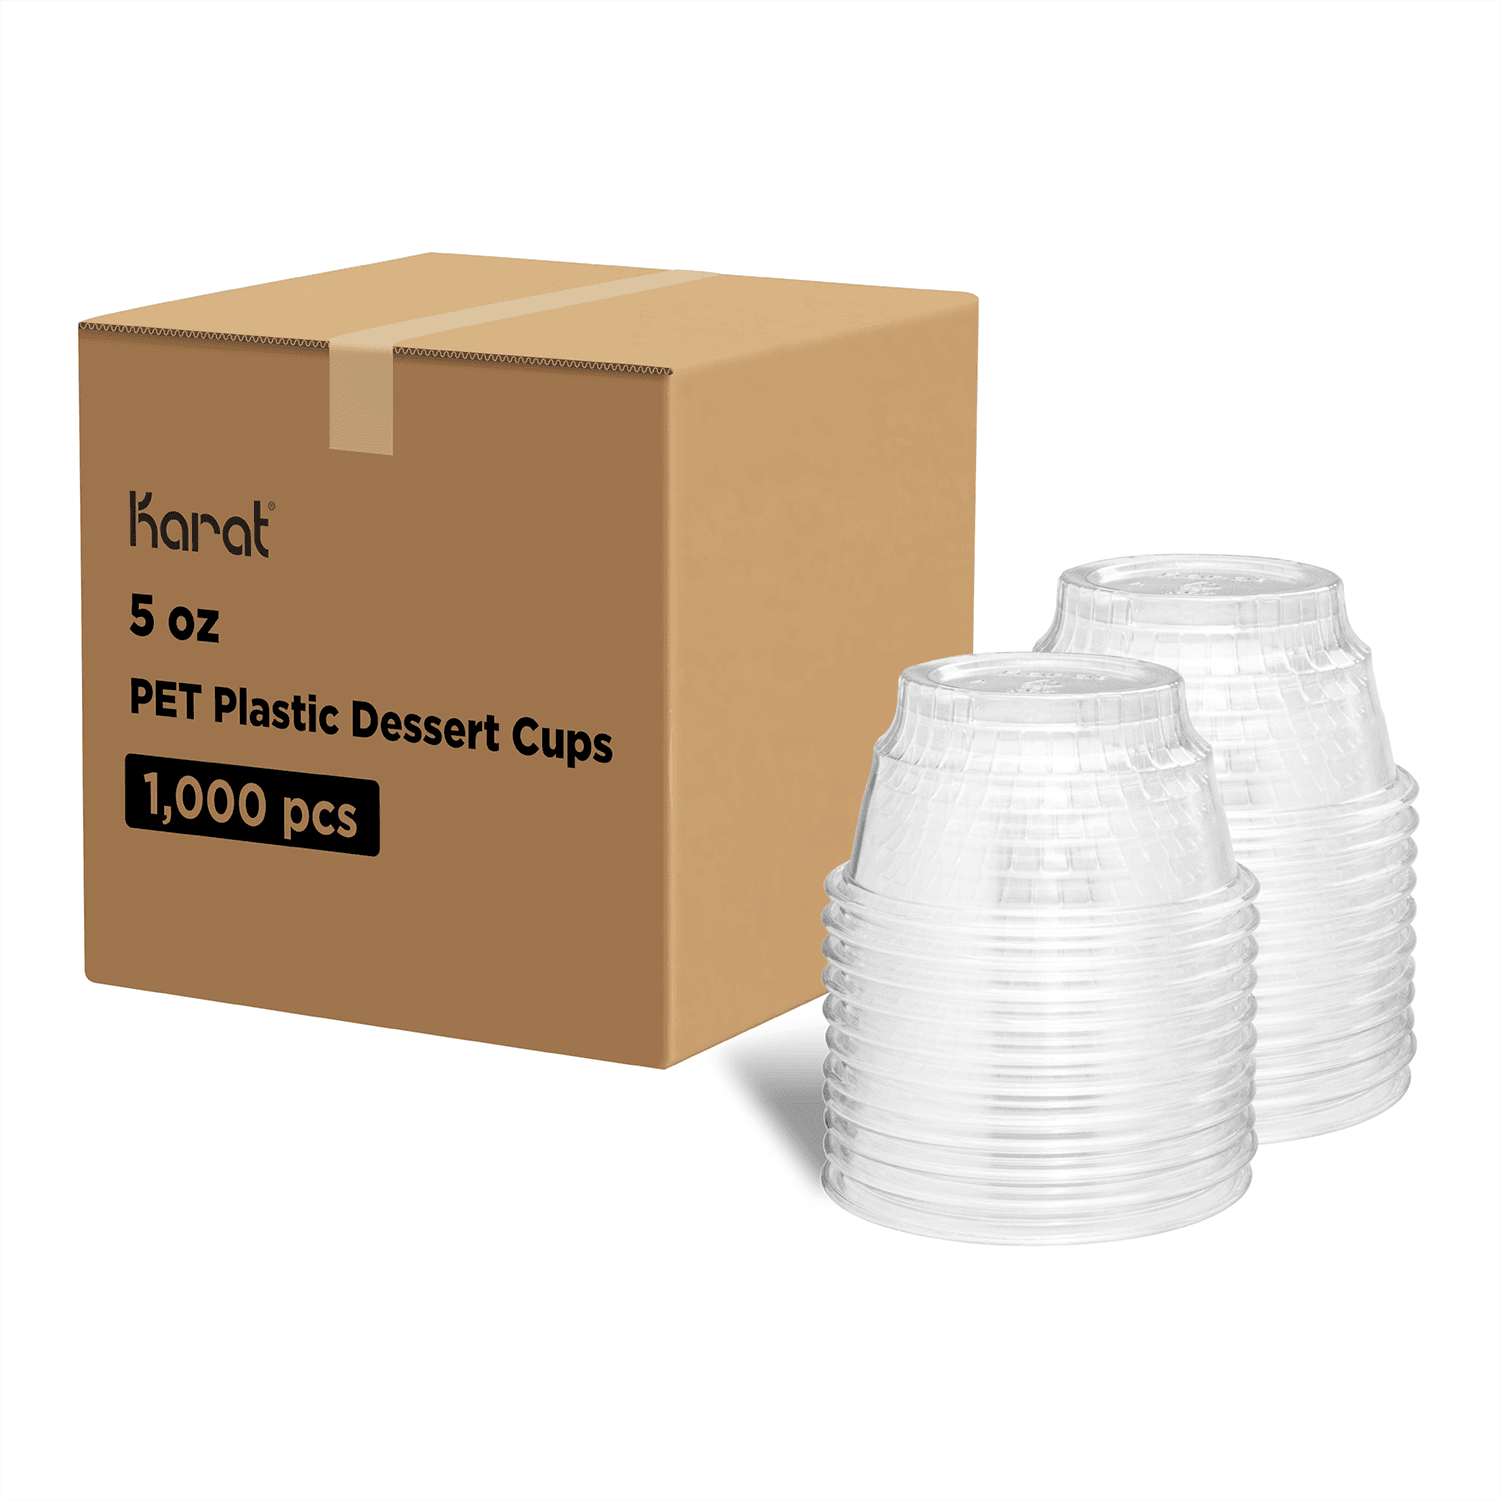 Clear Karat 5oz PET Plastic Dessert Cups stacked next to packaging